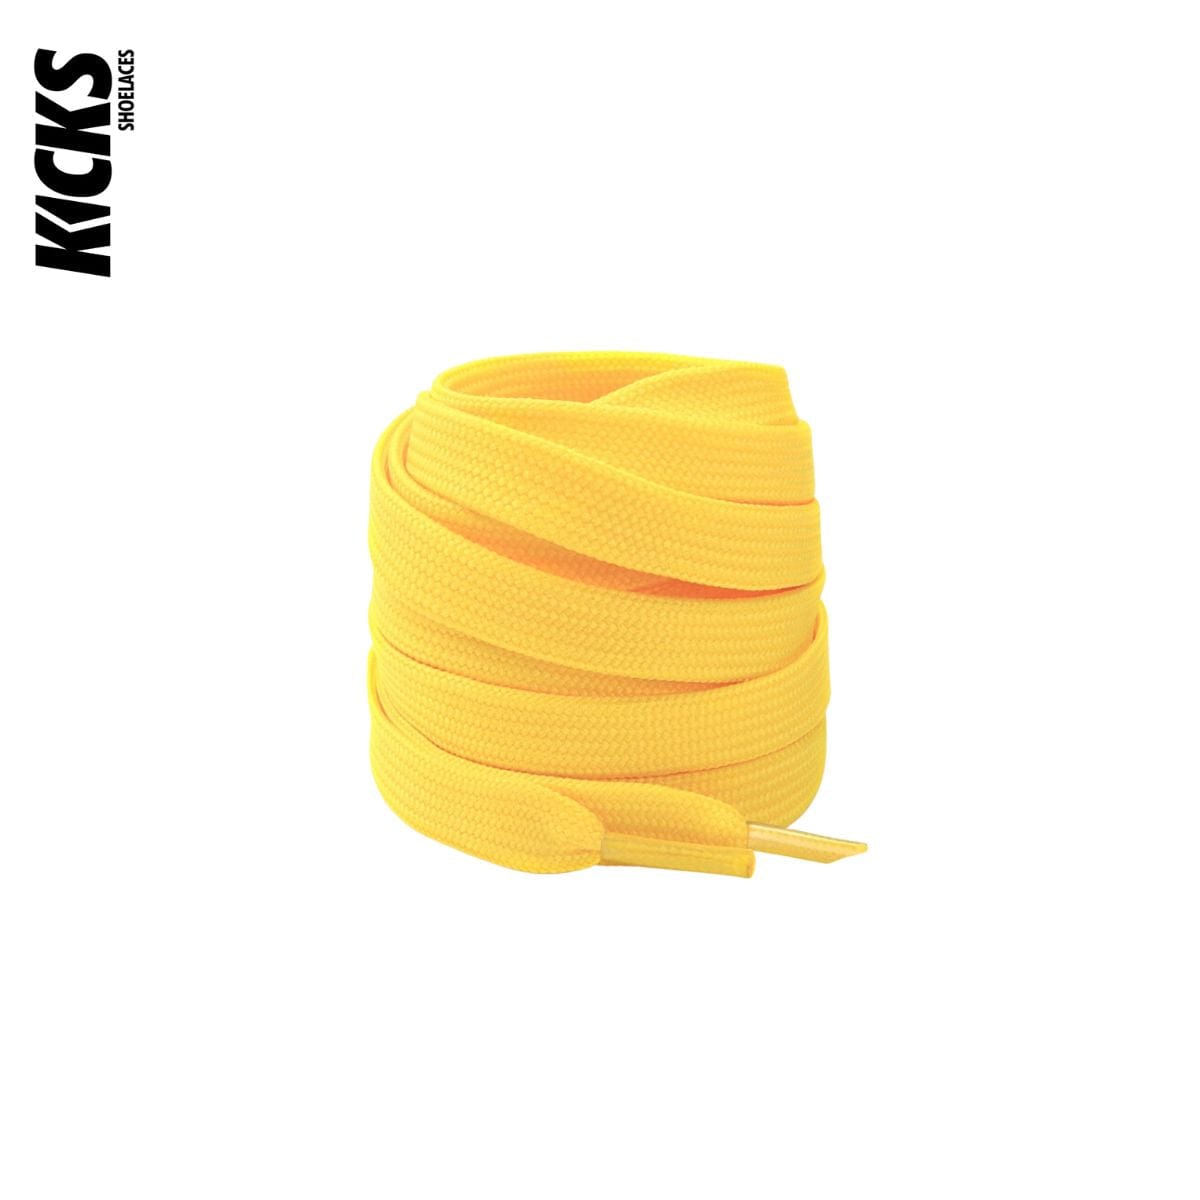 Golden Yellow Replacement Laces for Adidas EQT Sneakers by Kicks Shoelaces